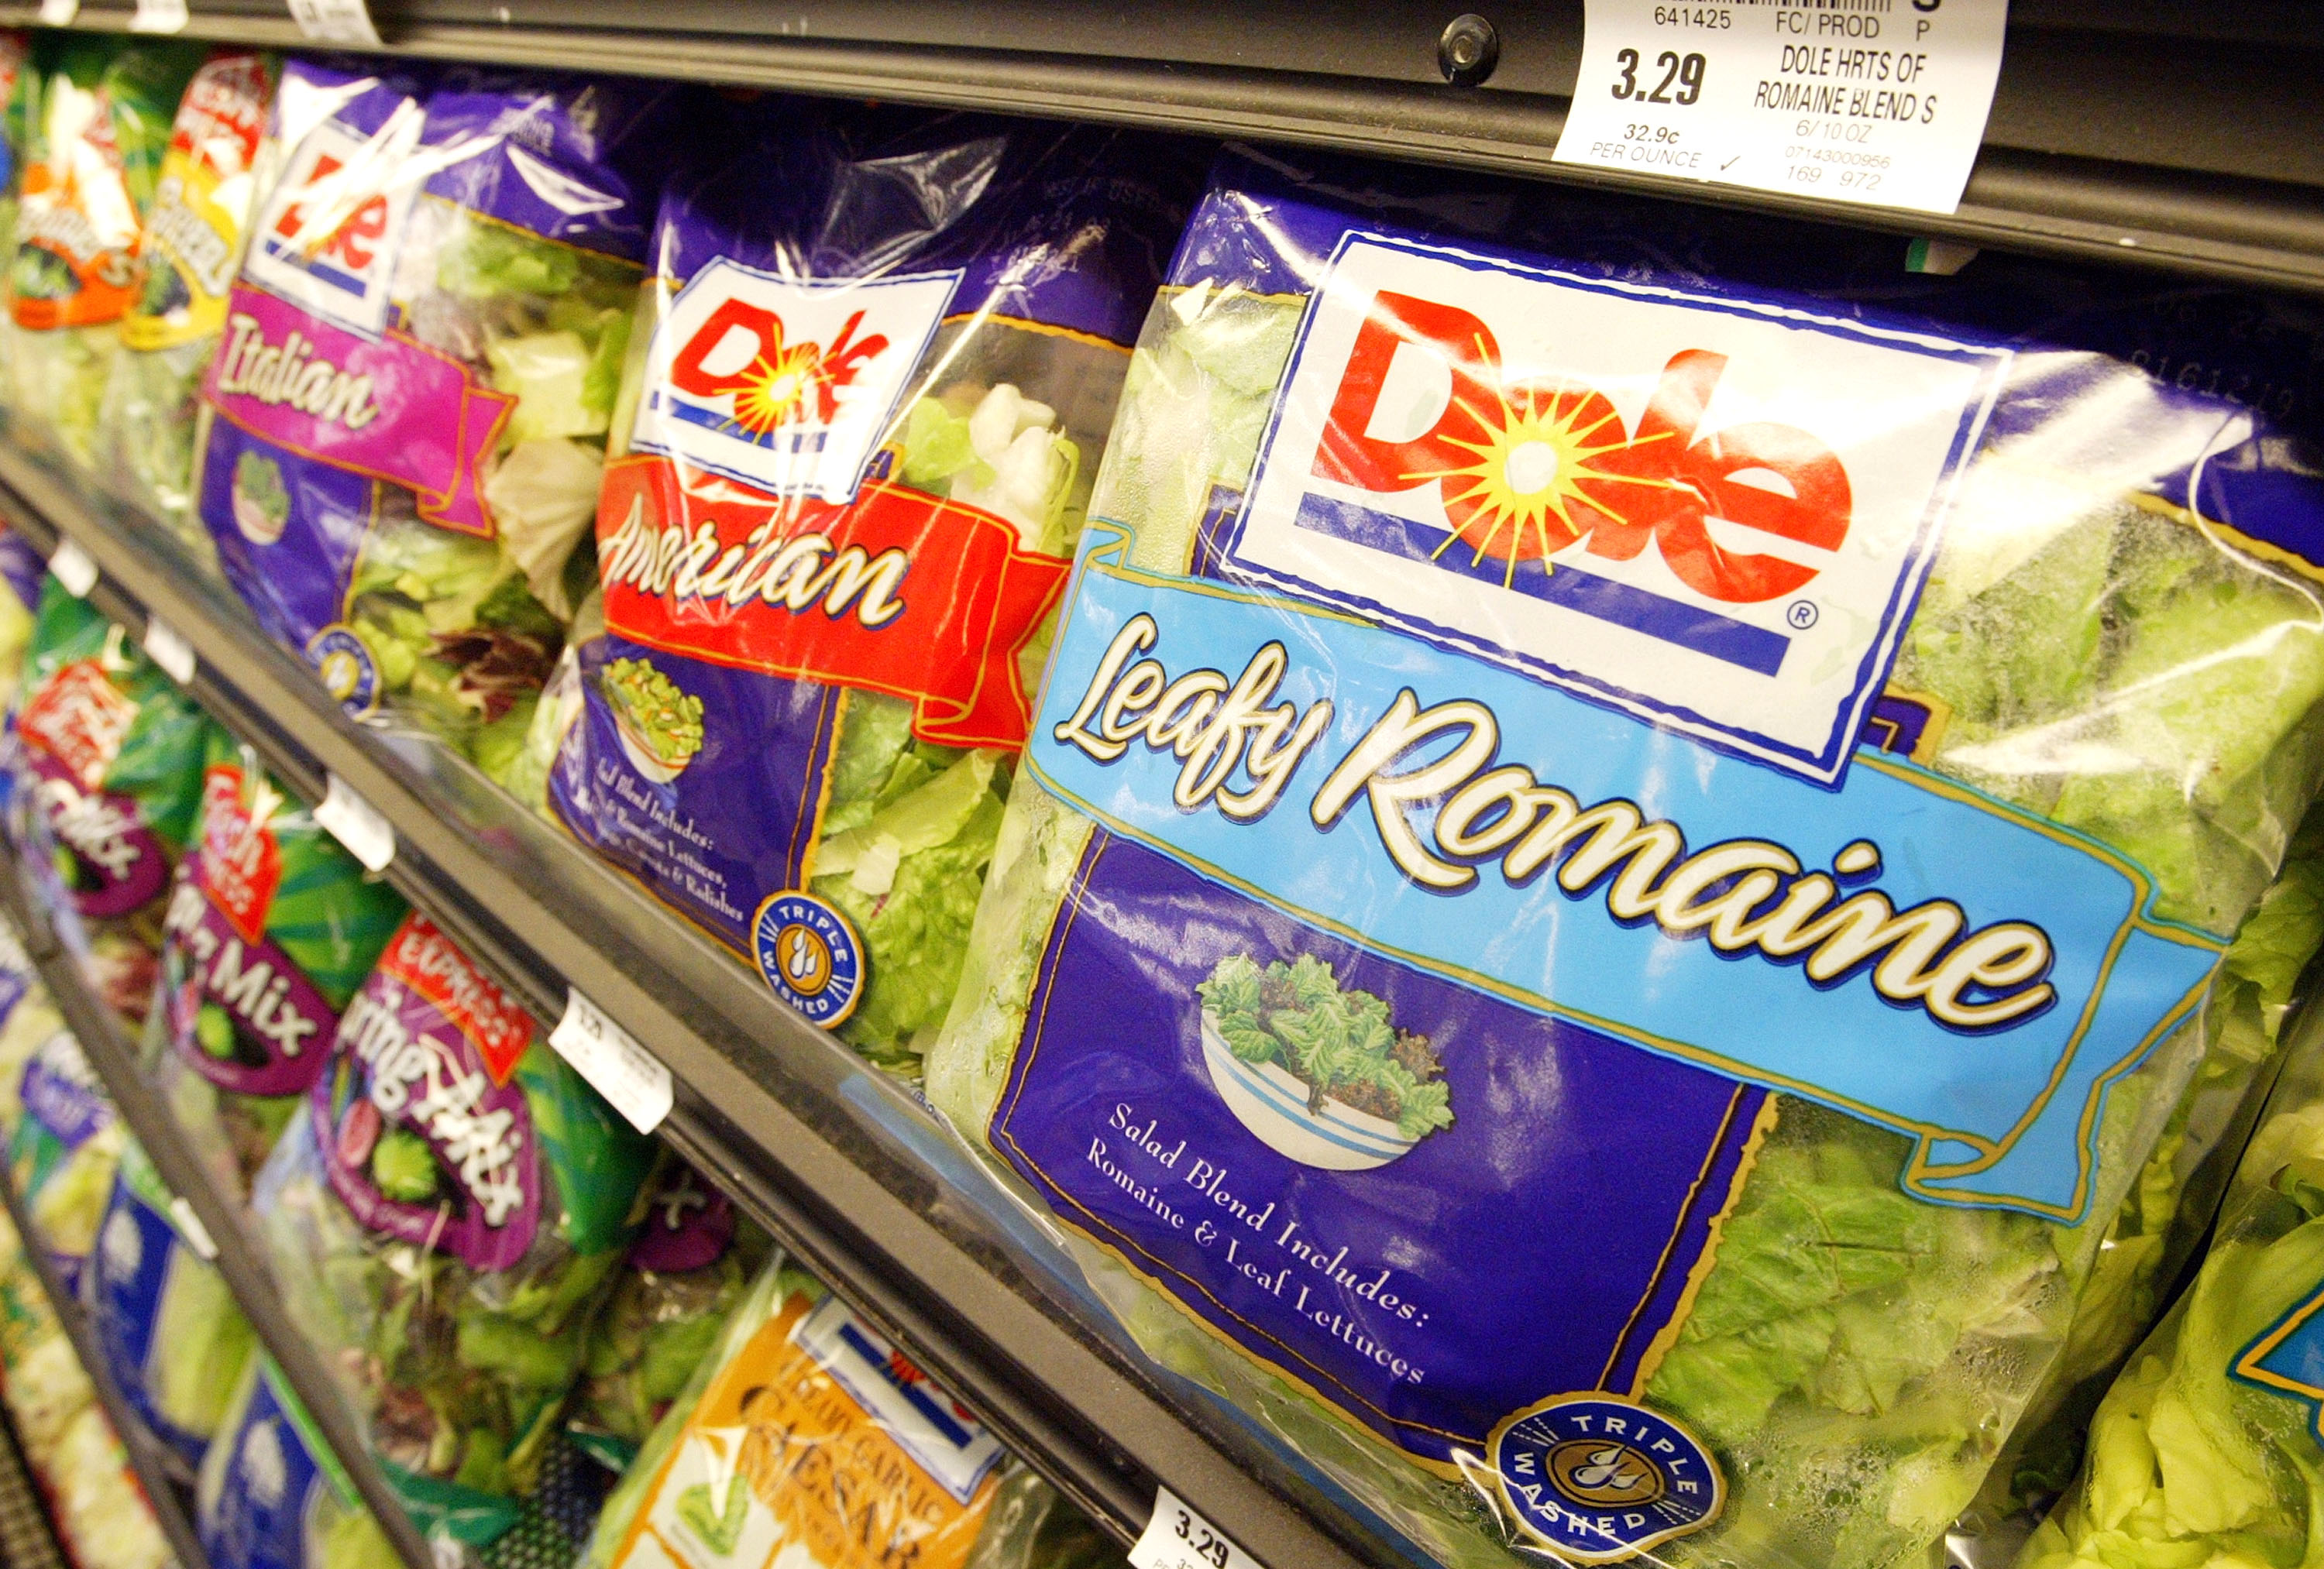 Trouble in the Salad Aisle: Dole Recall due to Possible Allergen